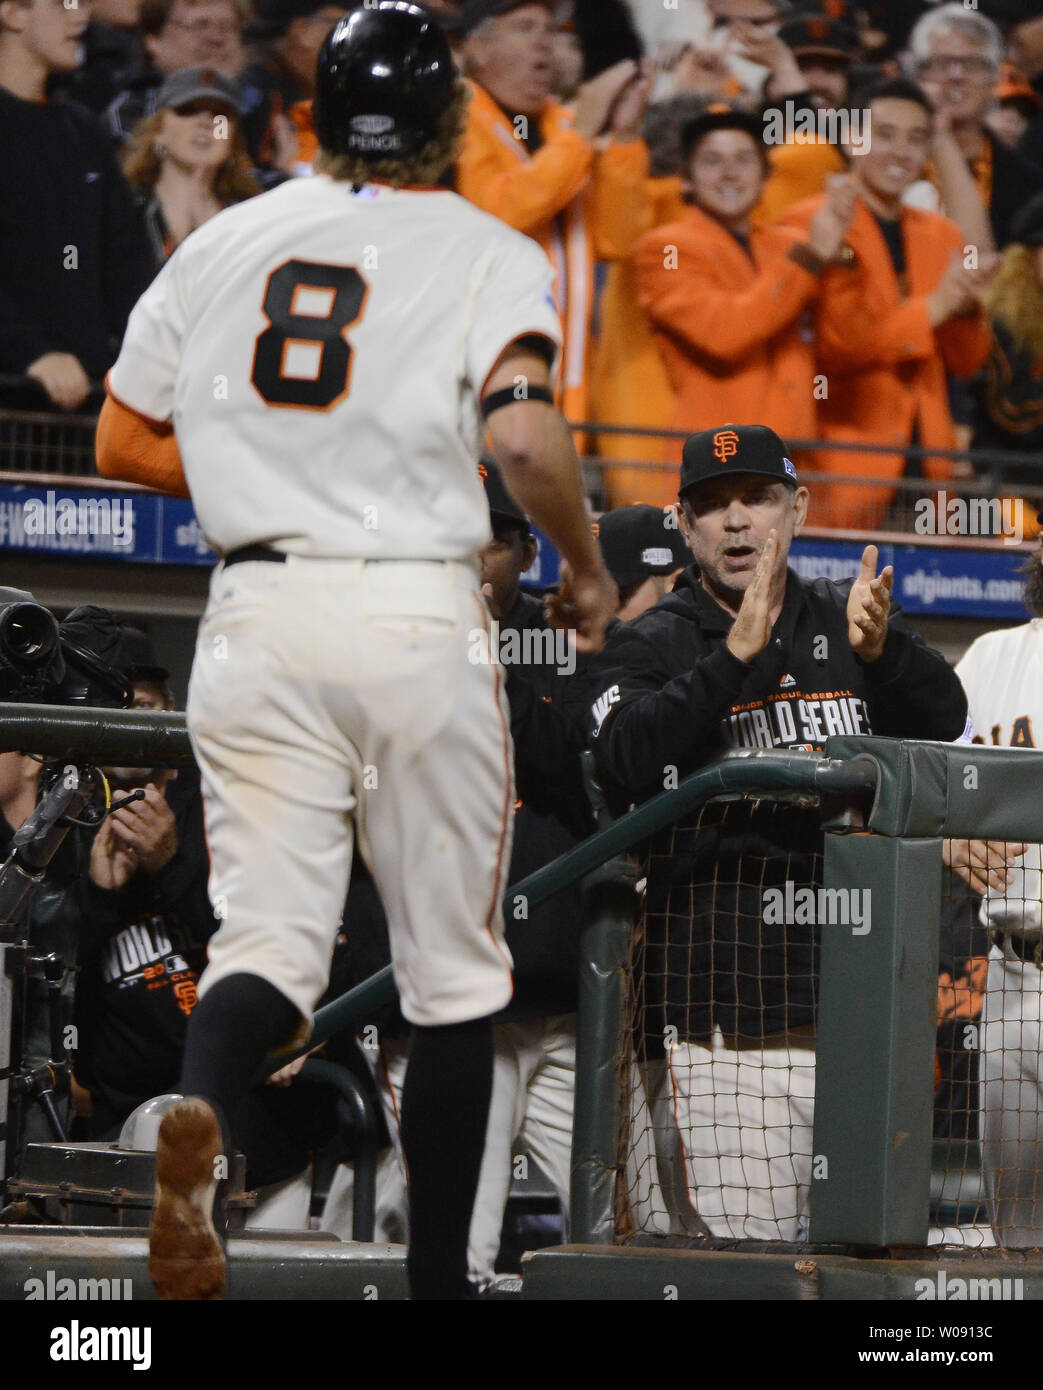 October 25, 2014: San Francisco Giants third baseman Joaquin Arias (13)  applauds after getting on second base in the 6th inning, during game 4 of  the World Series between the San Francisco